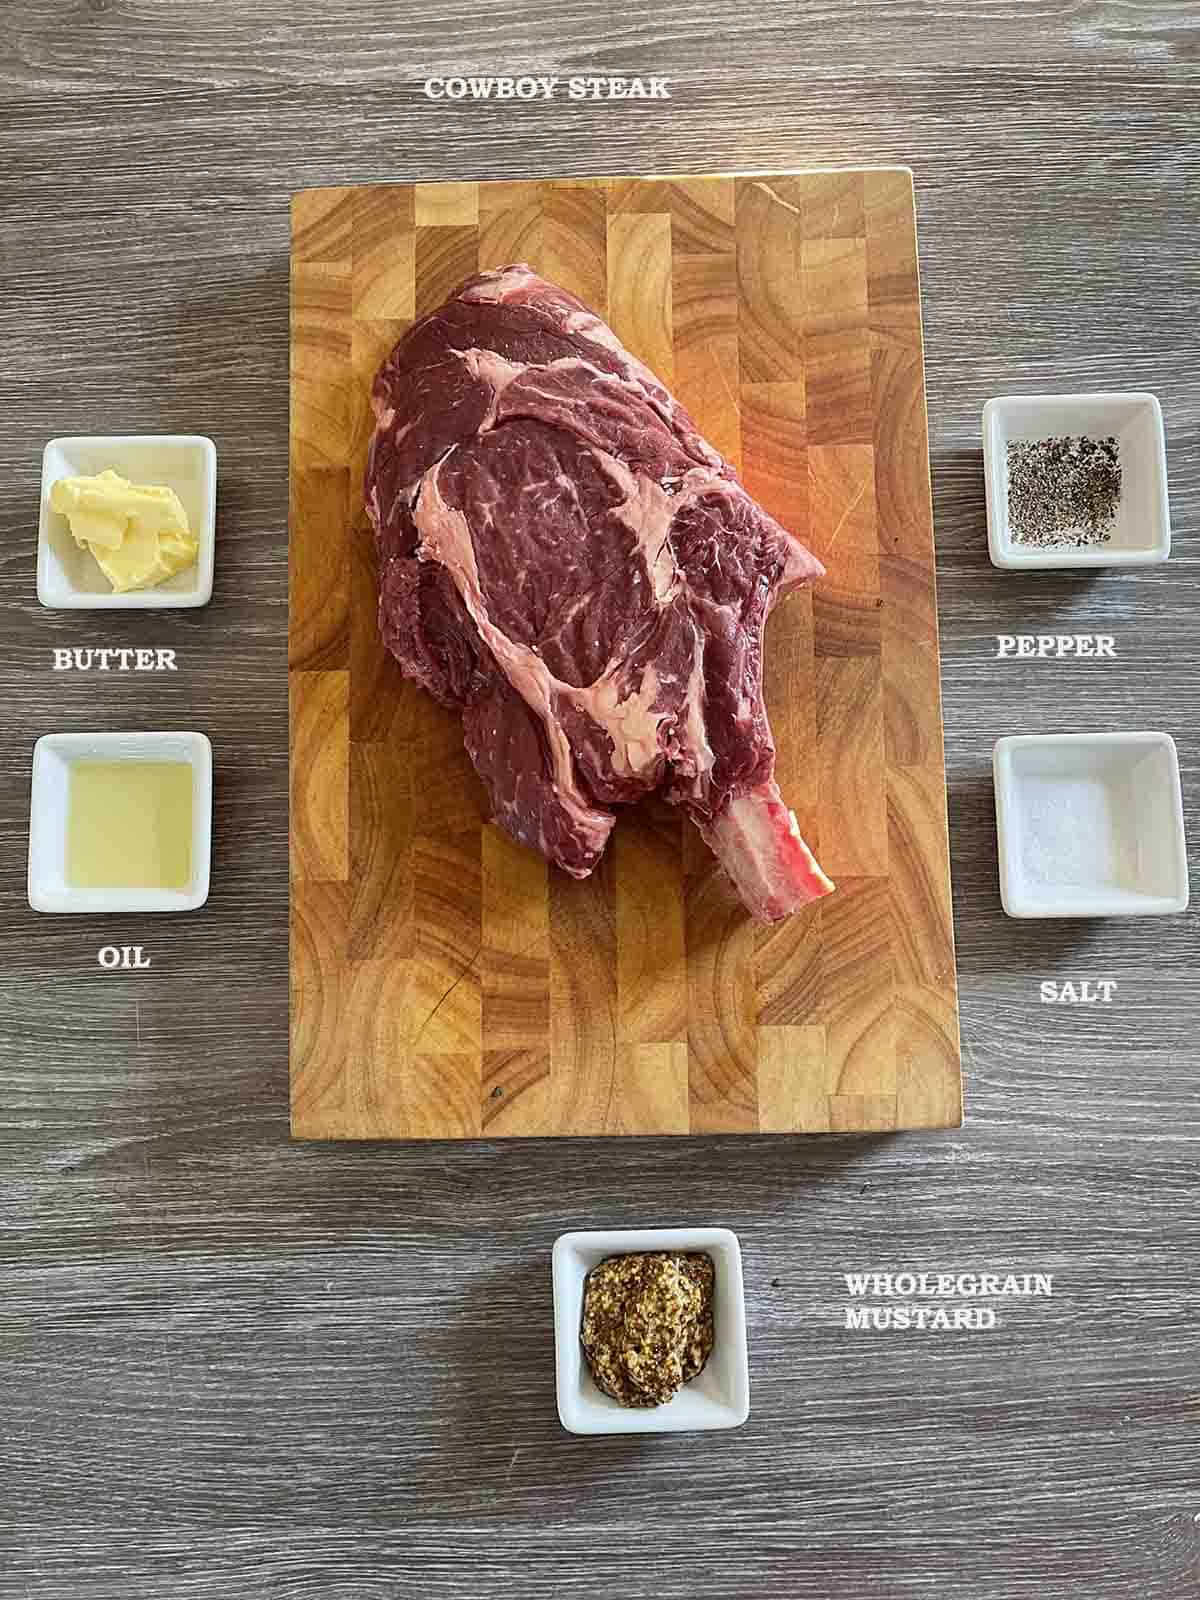 ingredients including bone in ribeye, butter, oil and mustard.